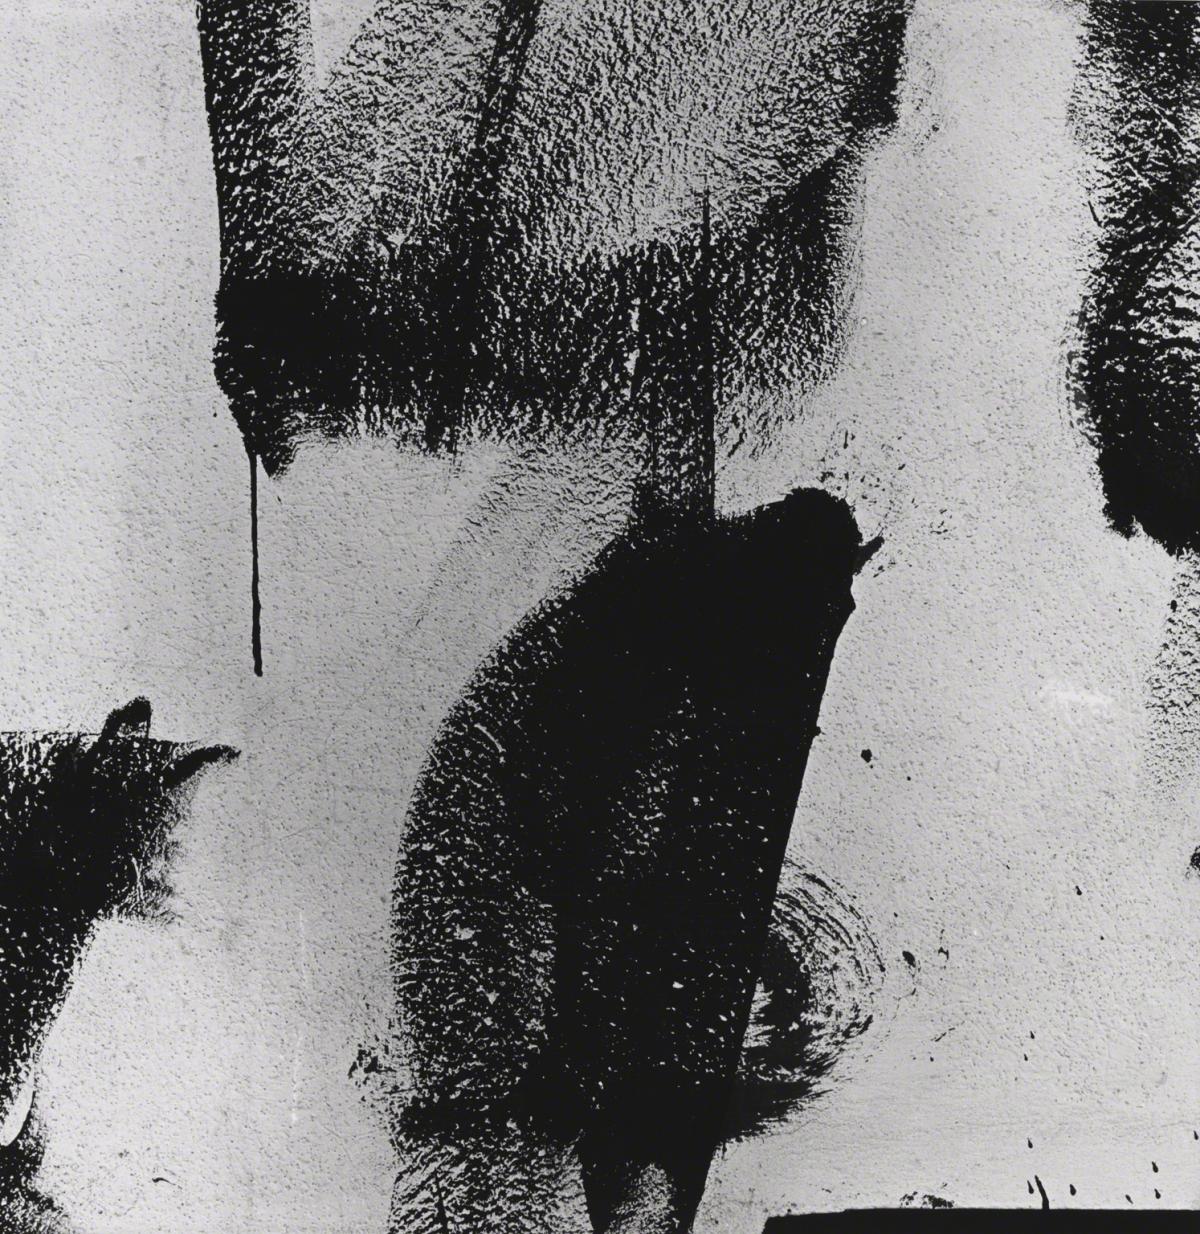 Black and white photograph showing smears of back paint on a white wall